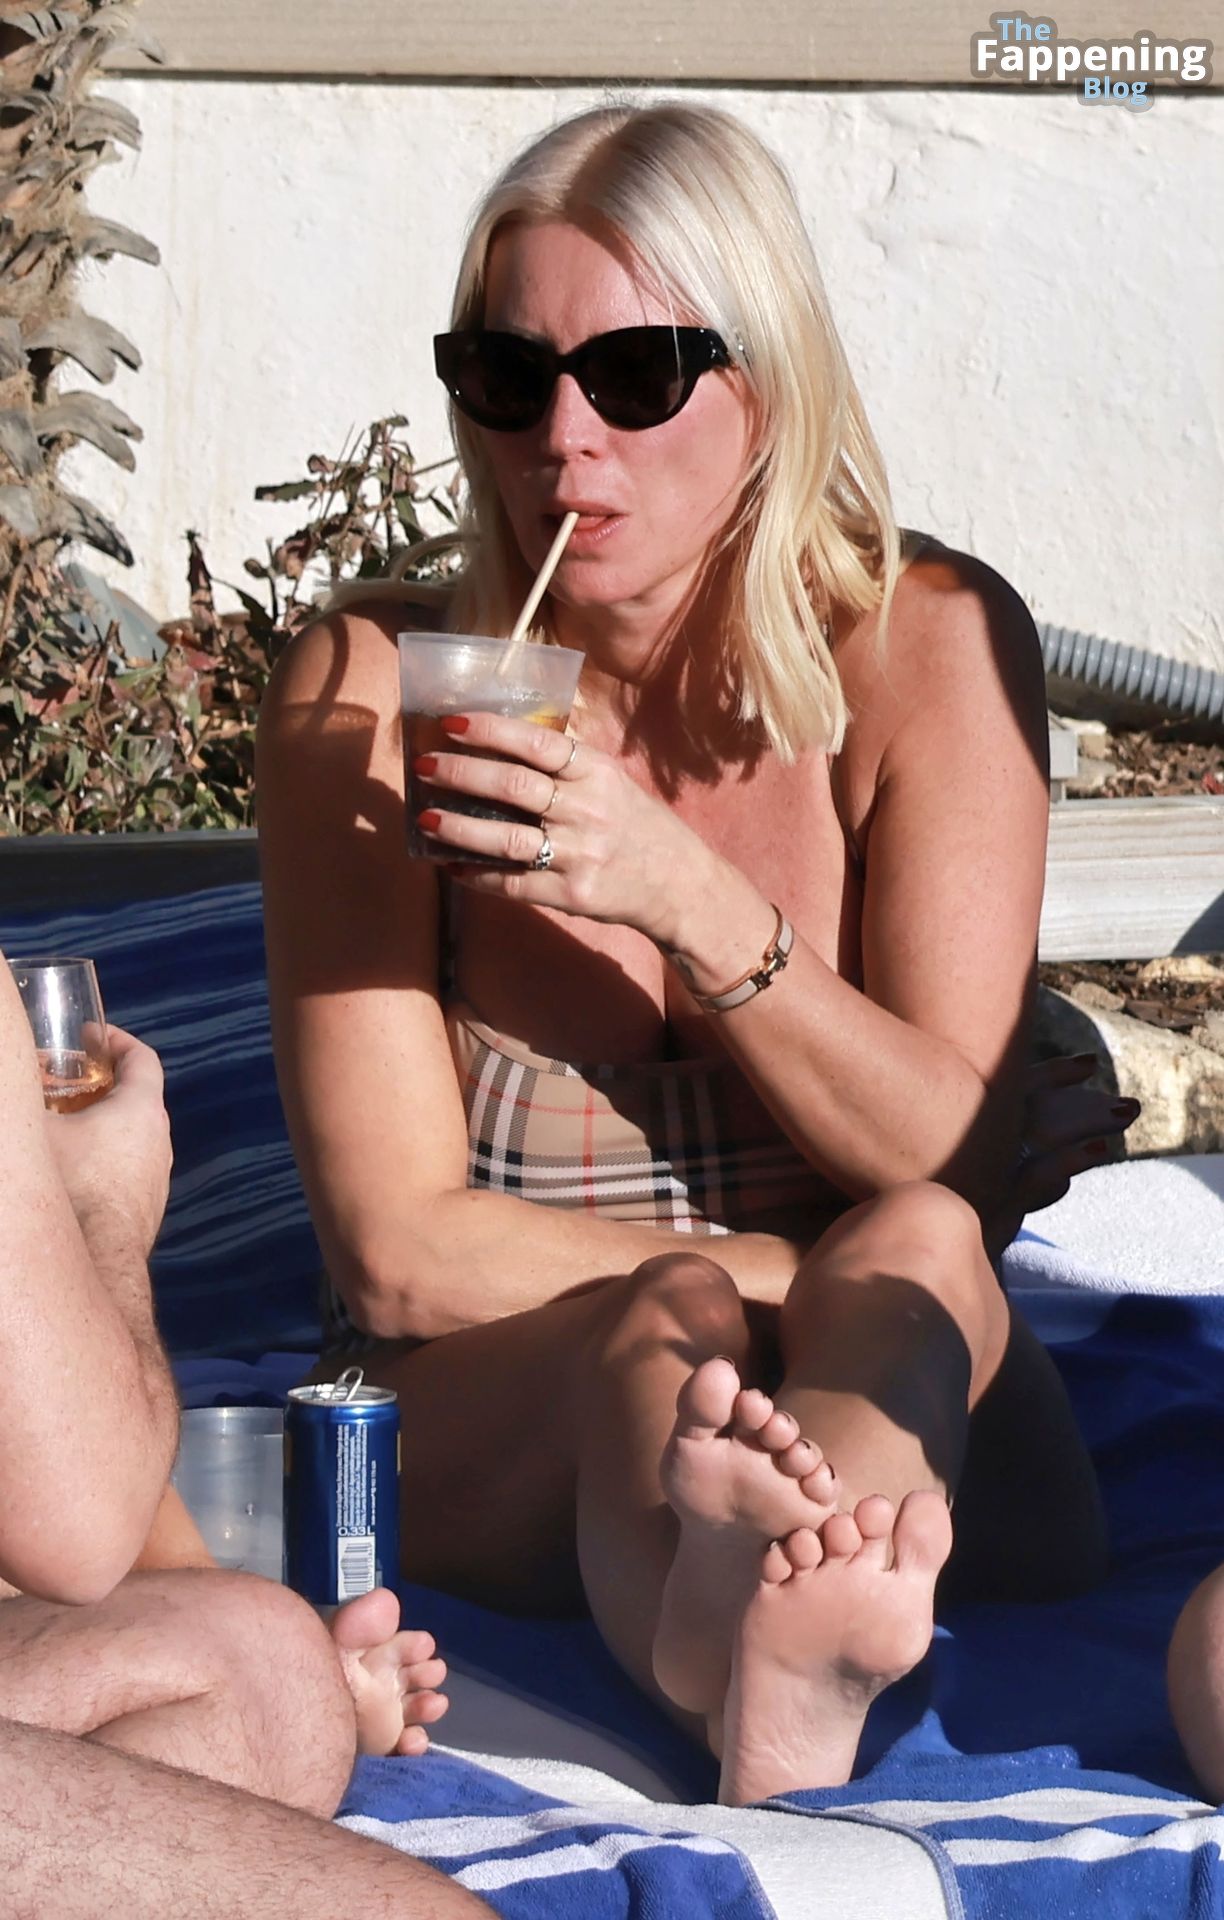 Denise van Outen Looks in a Great Mood While Chilling with Friends on Holiday in Spain (140 Photos)